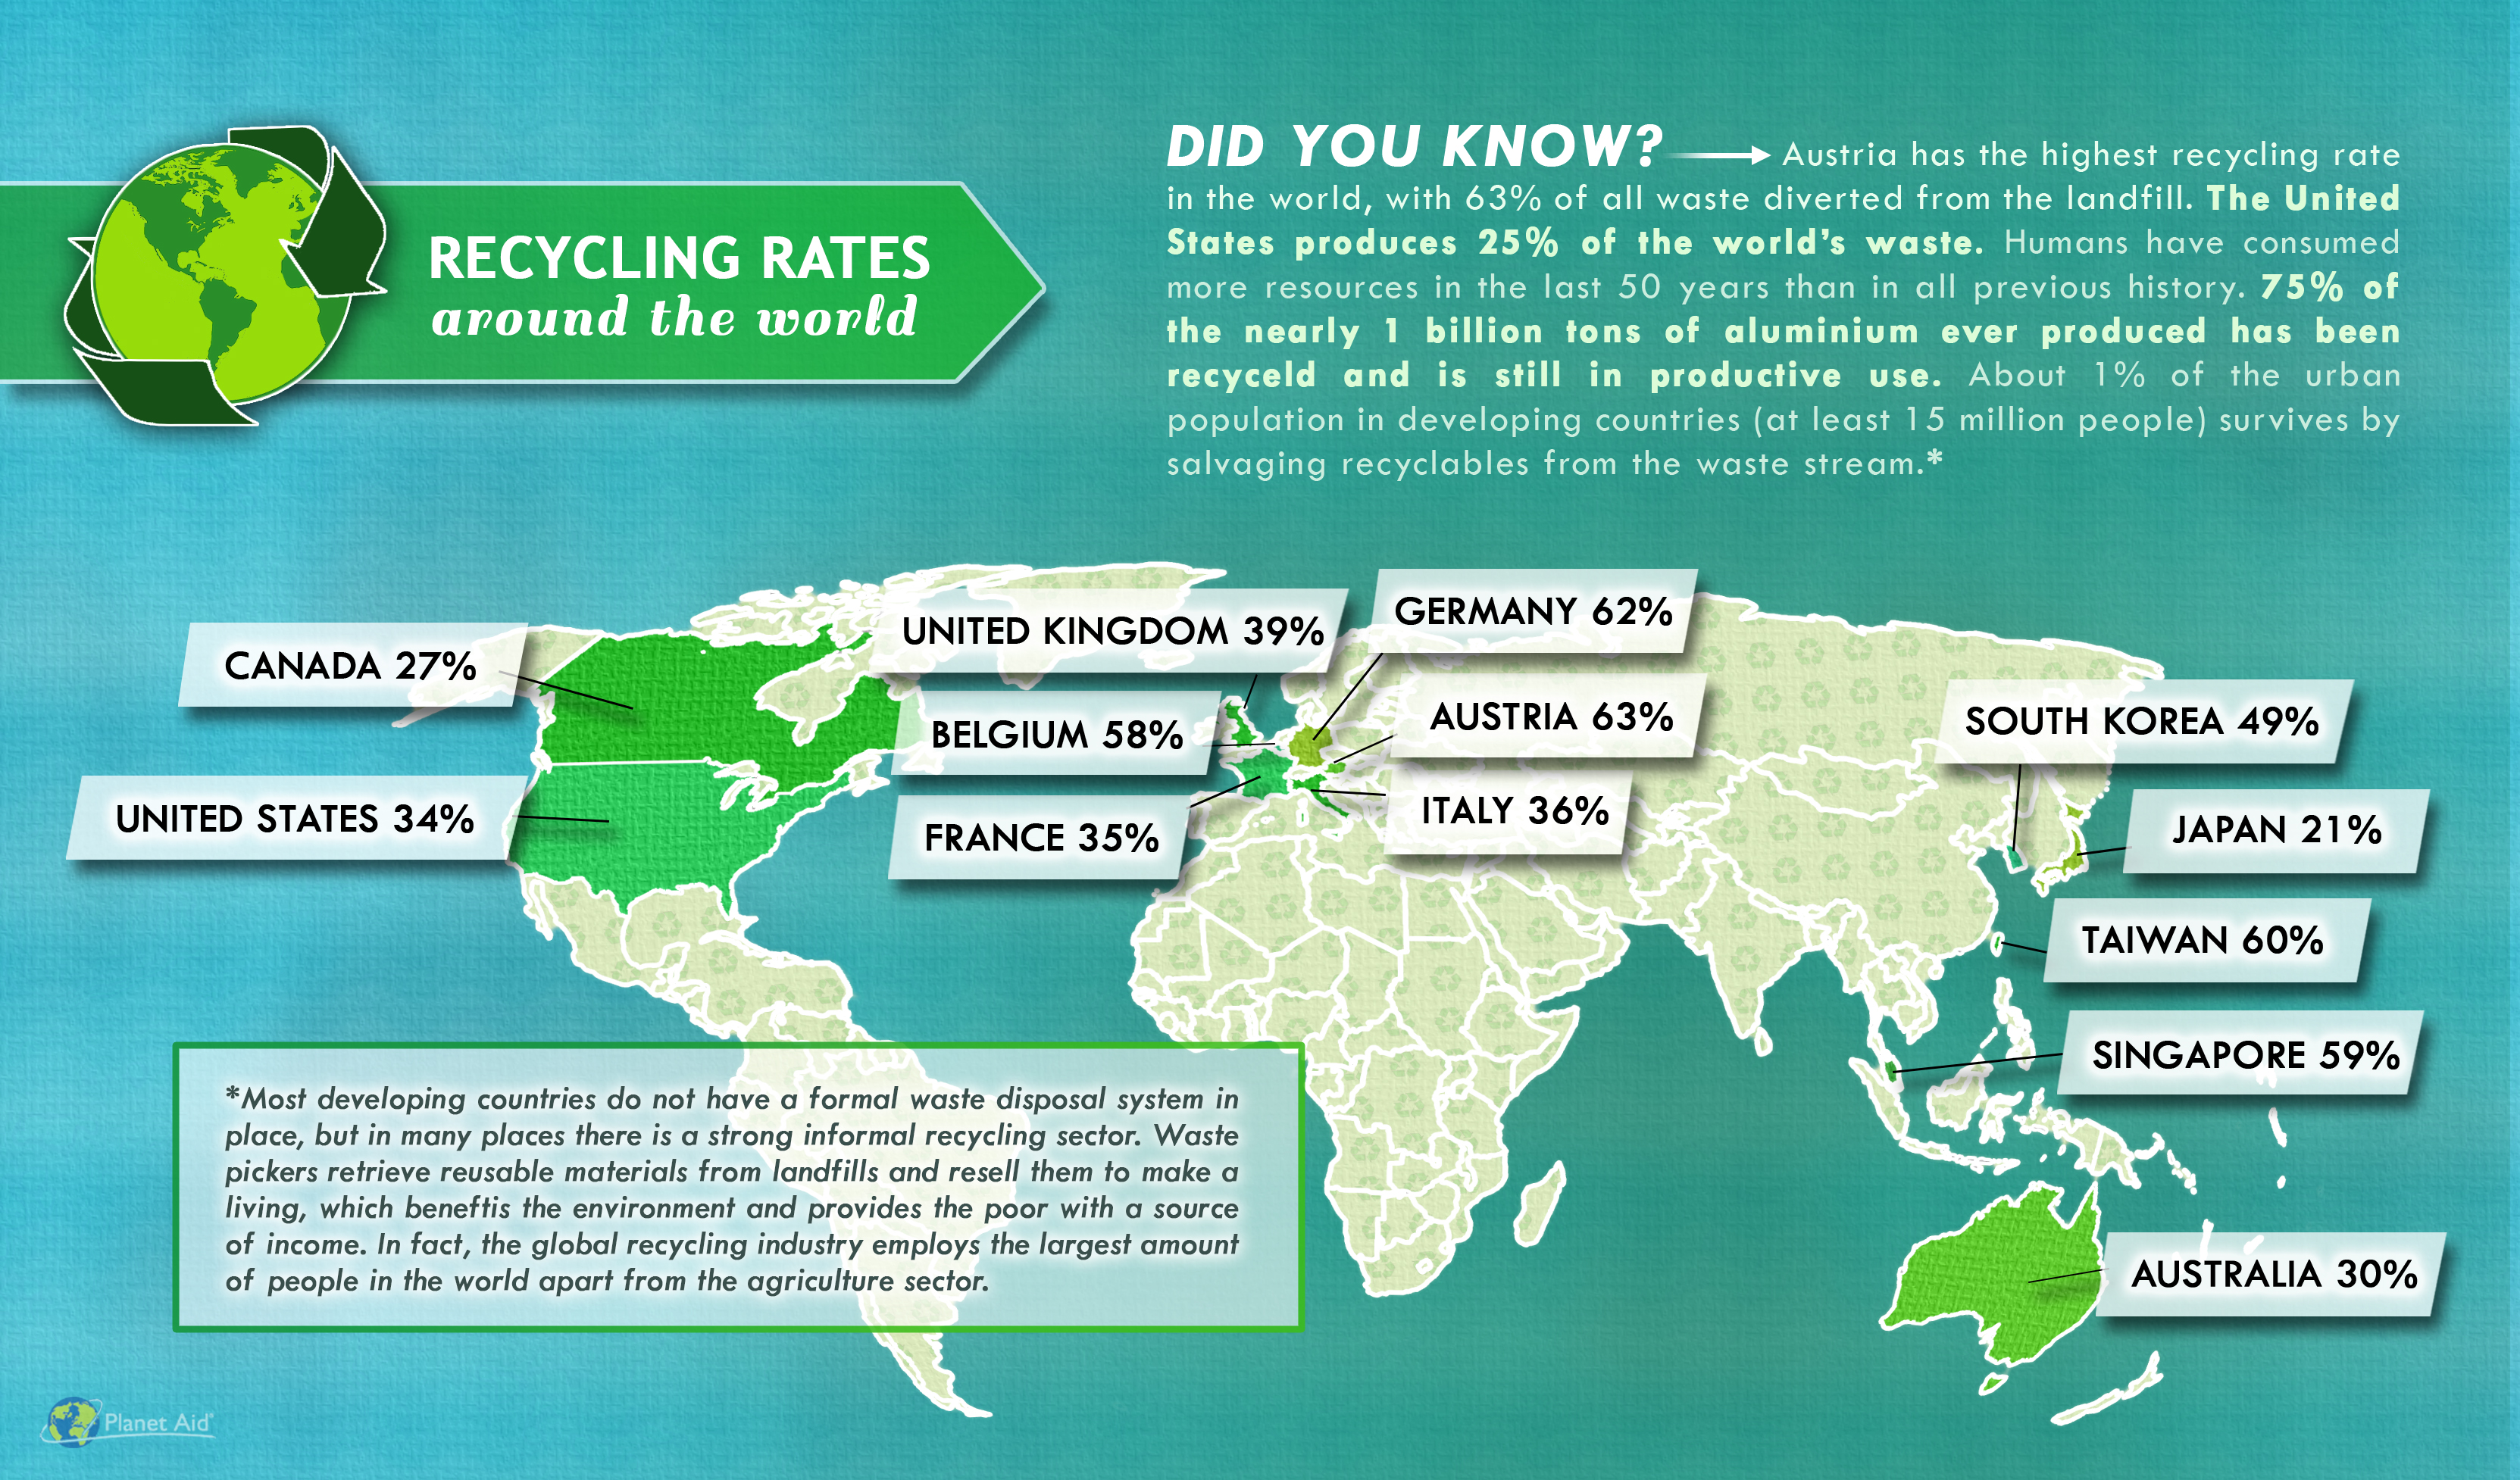 Source: http://www.planetaid.org/latest-news/epa-reports-waste-volume-up-recycling-is-flat